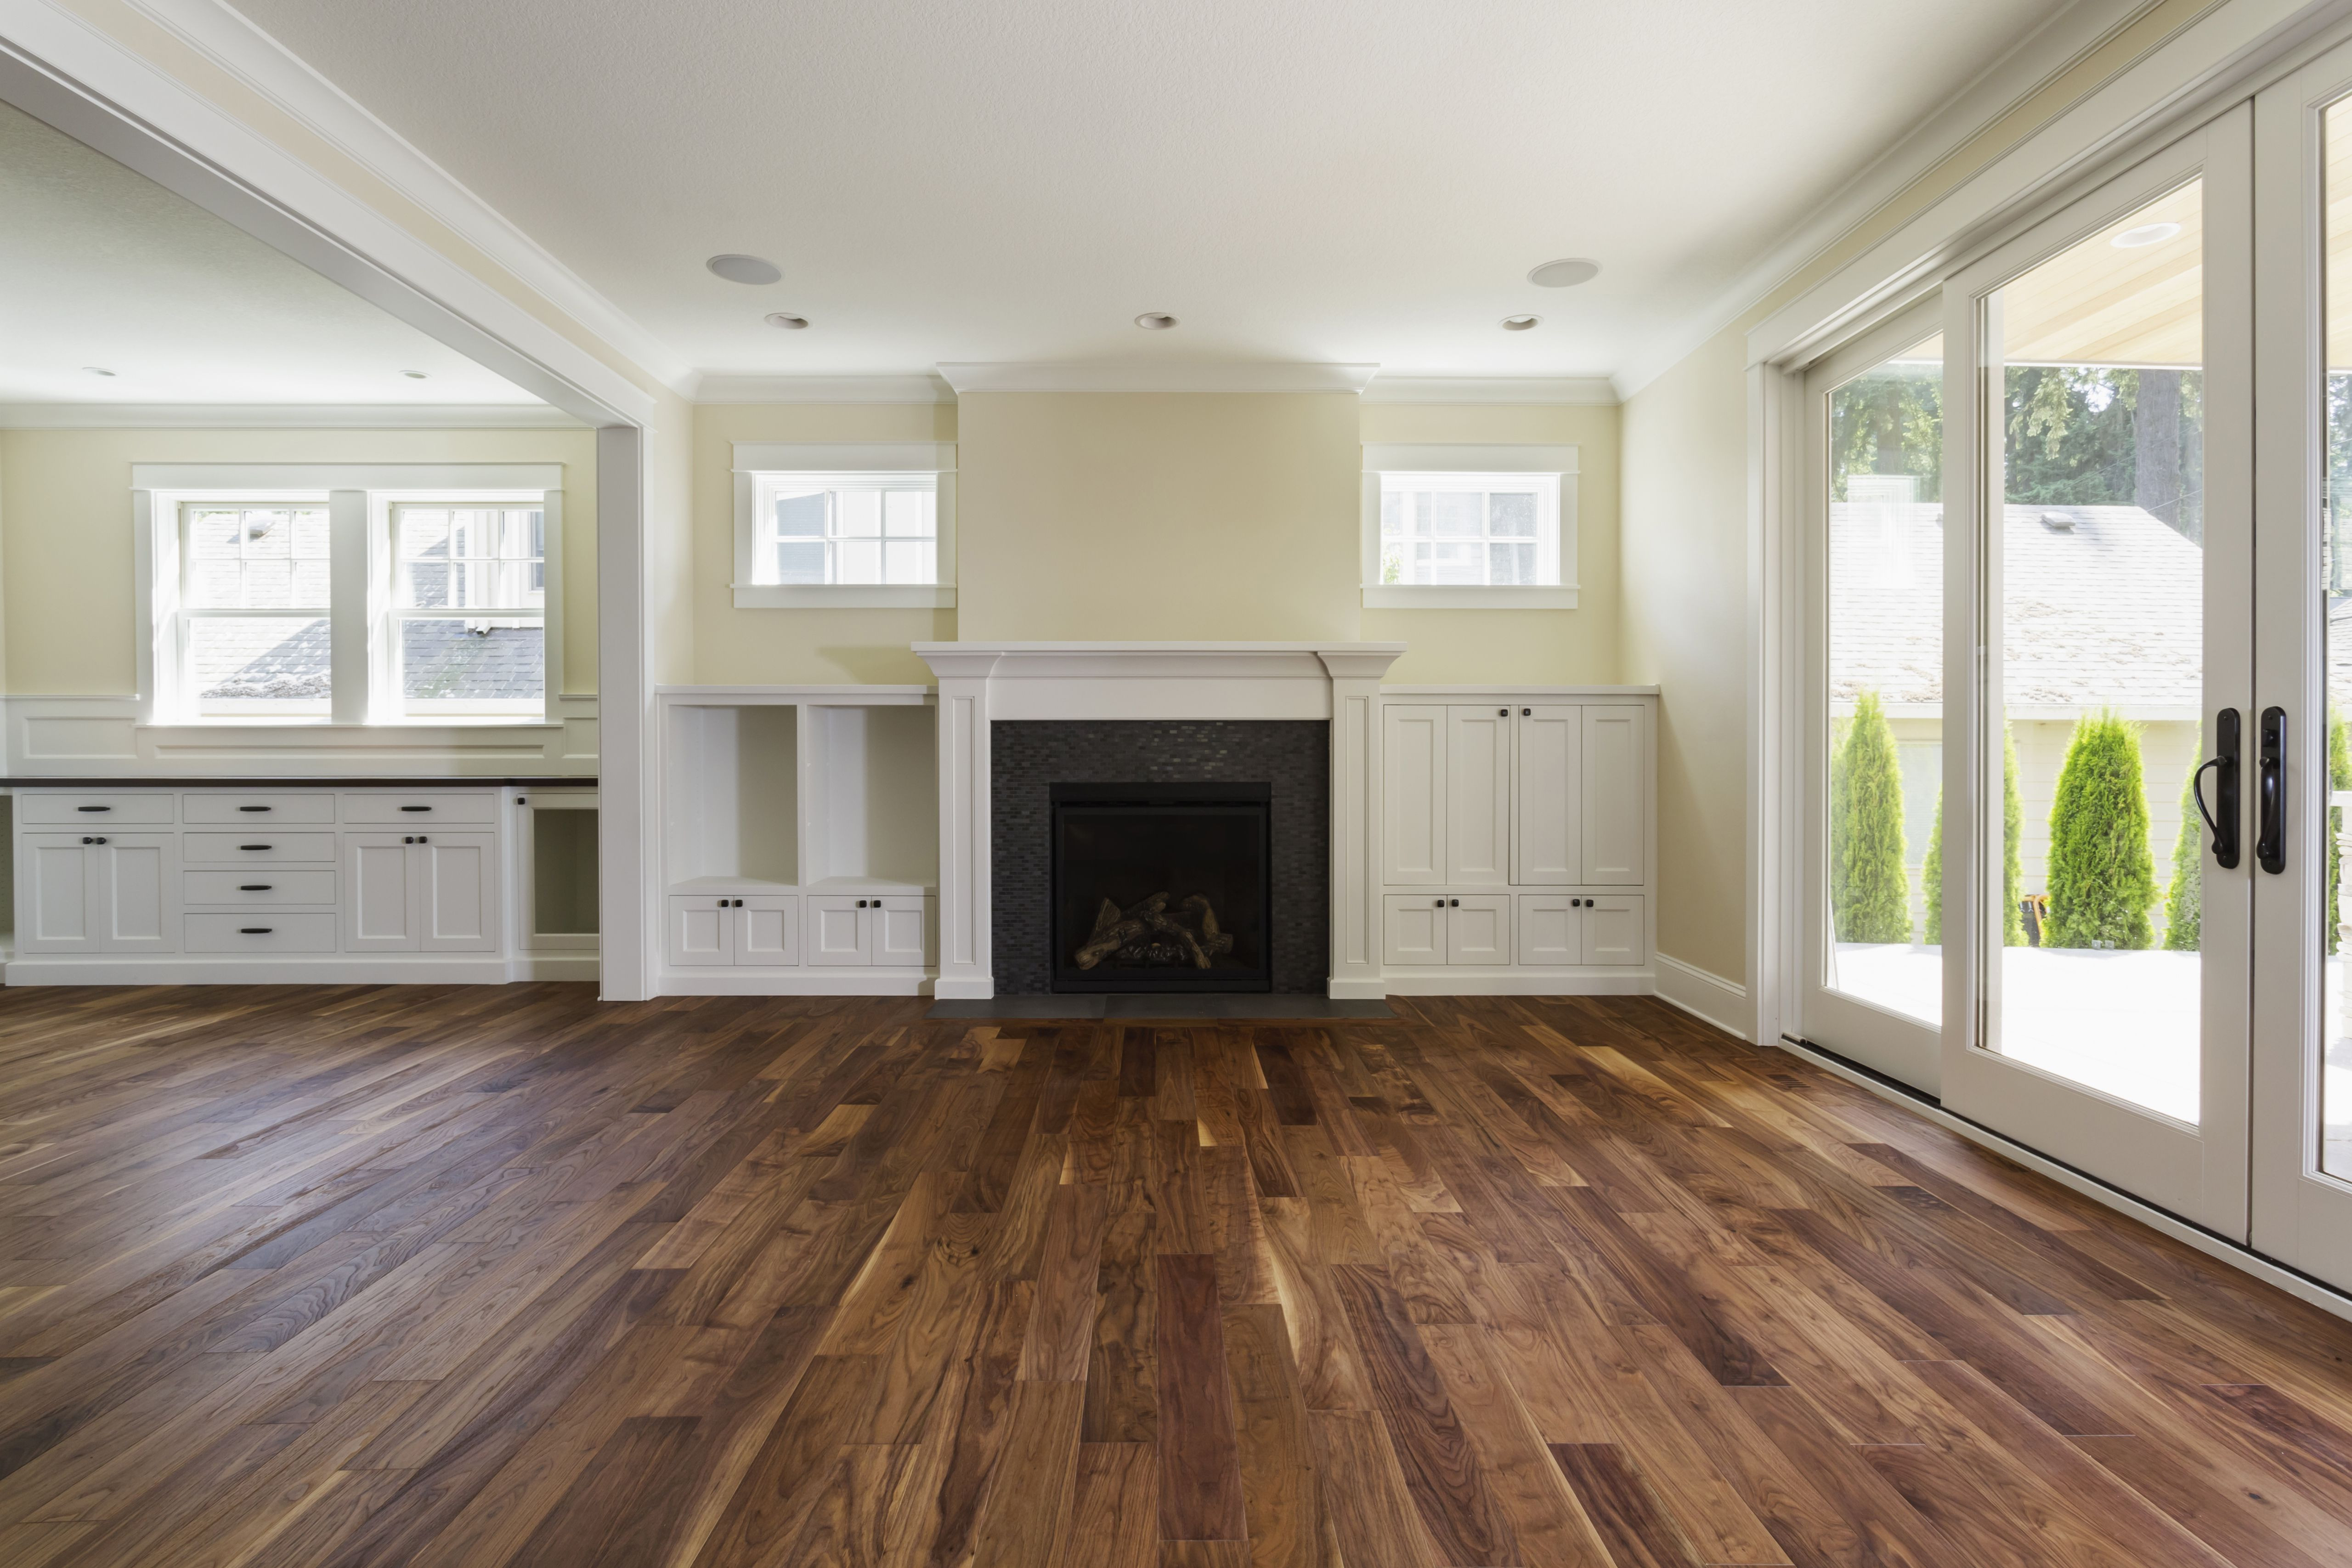 28 Fabulous Staining Hardwood Floors after Sanding 2024 free download staining hardwood floors after sanding of the pros and cons of prefinished hardwood flooring within fireplace and built in shelves in living room 482143011 57bef8e33df78cc16e035397